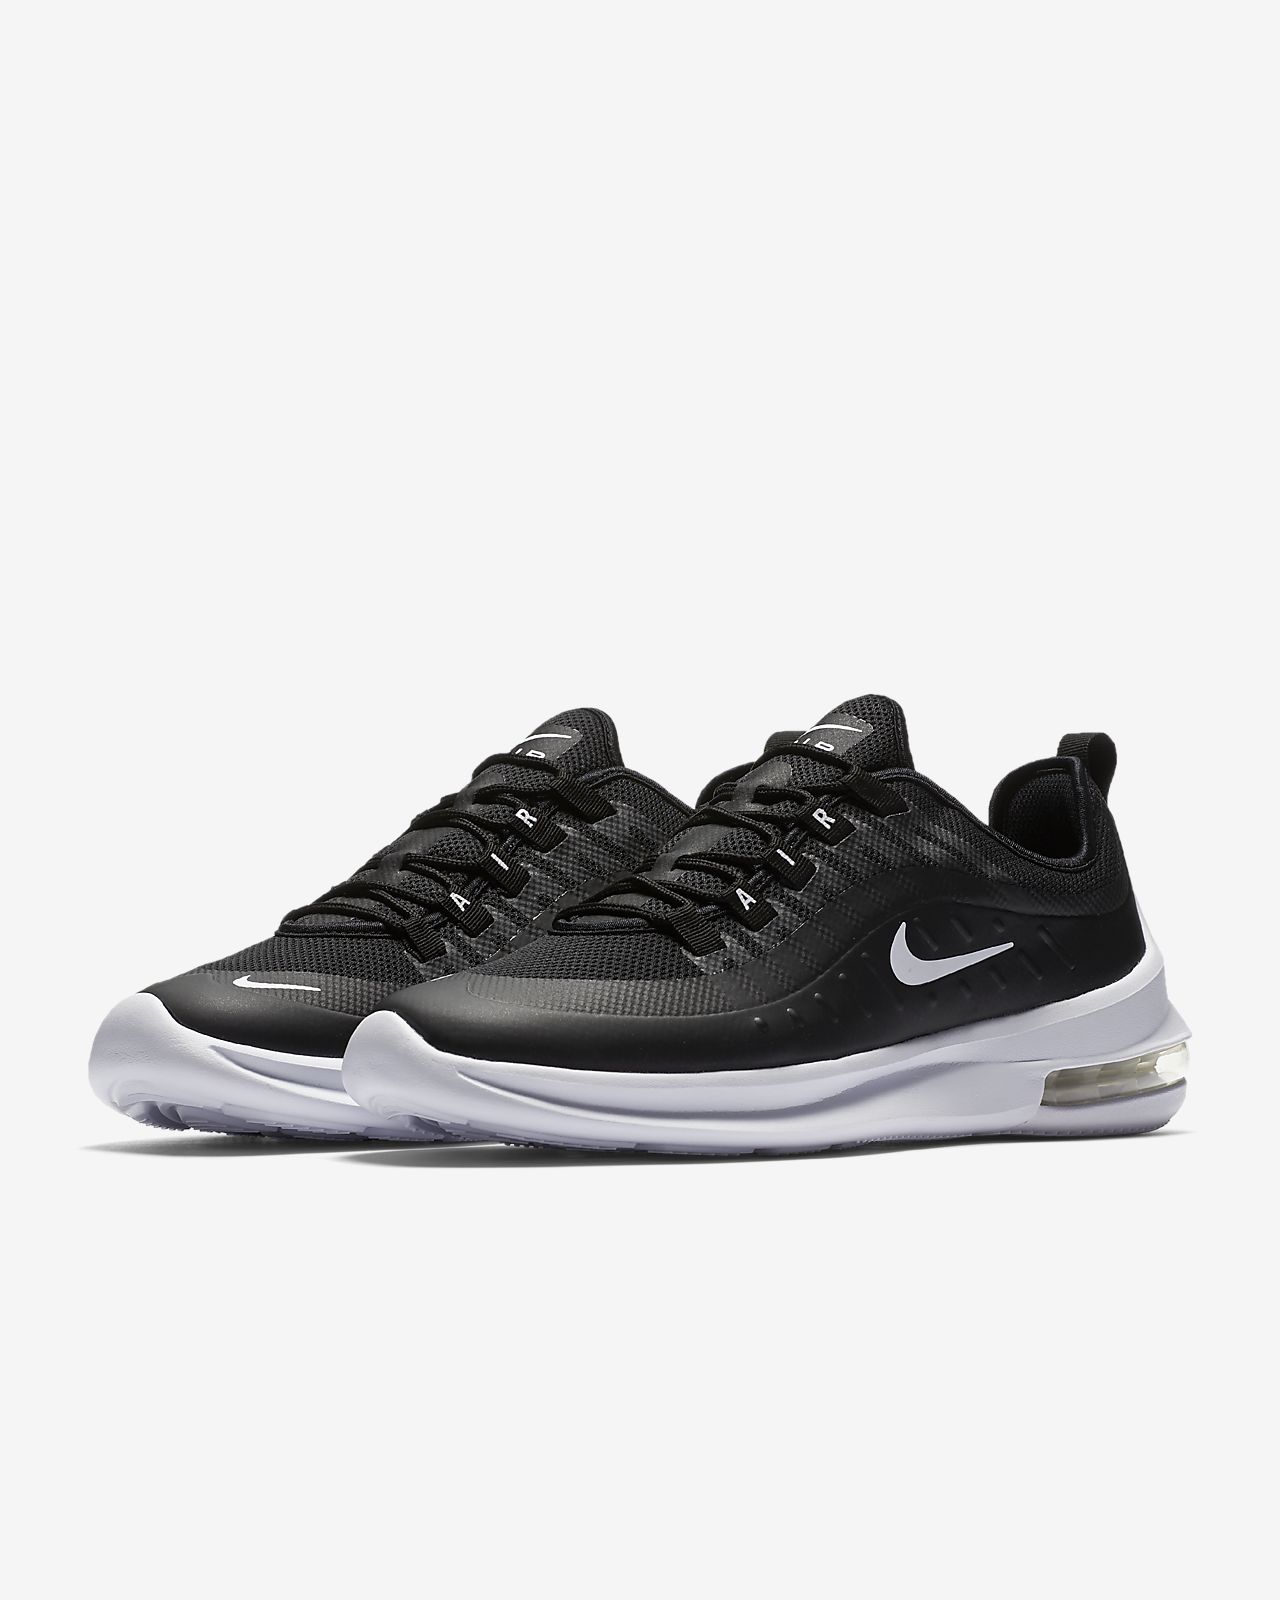 nike air max axis men's black and white